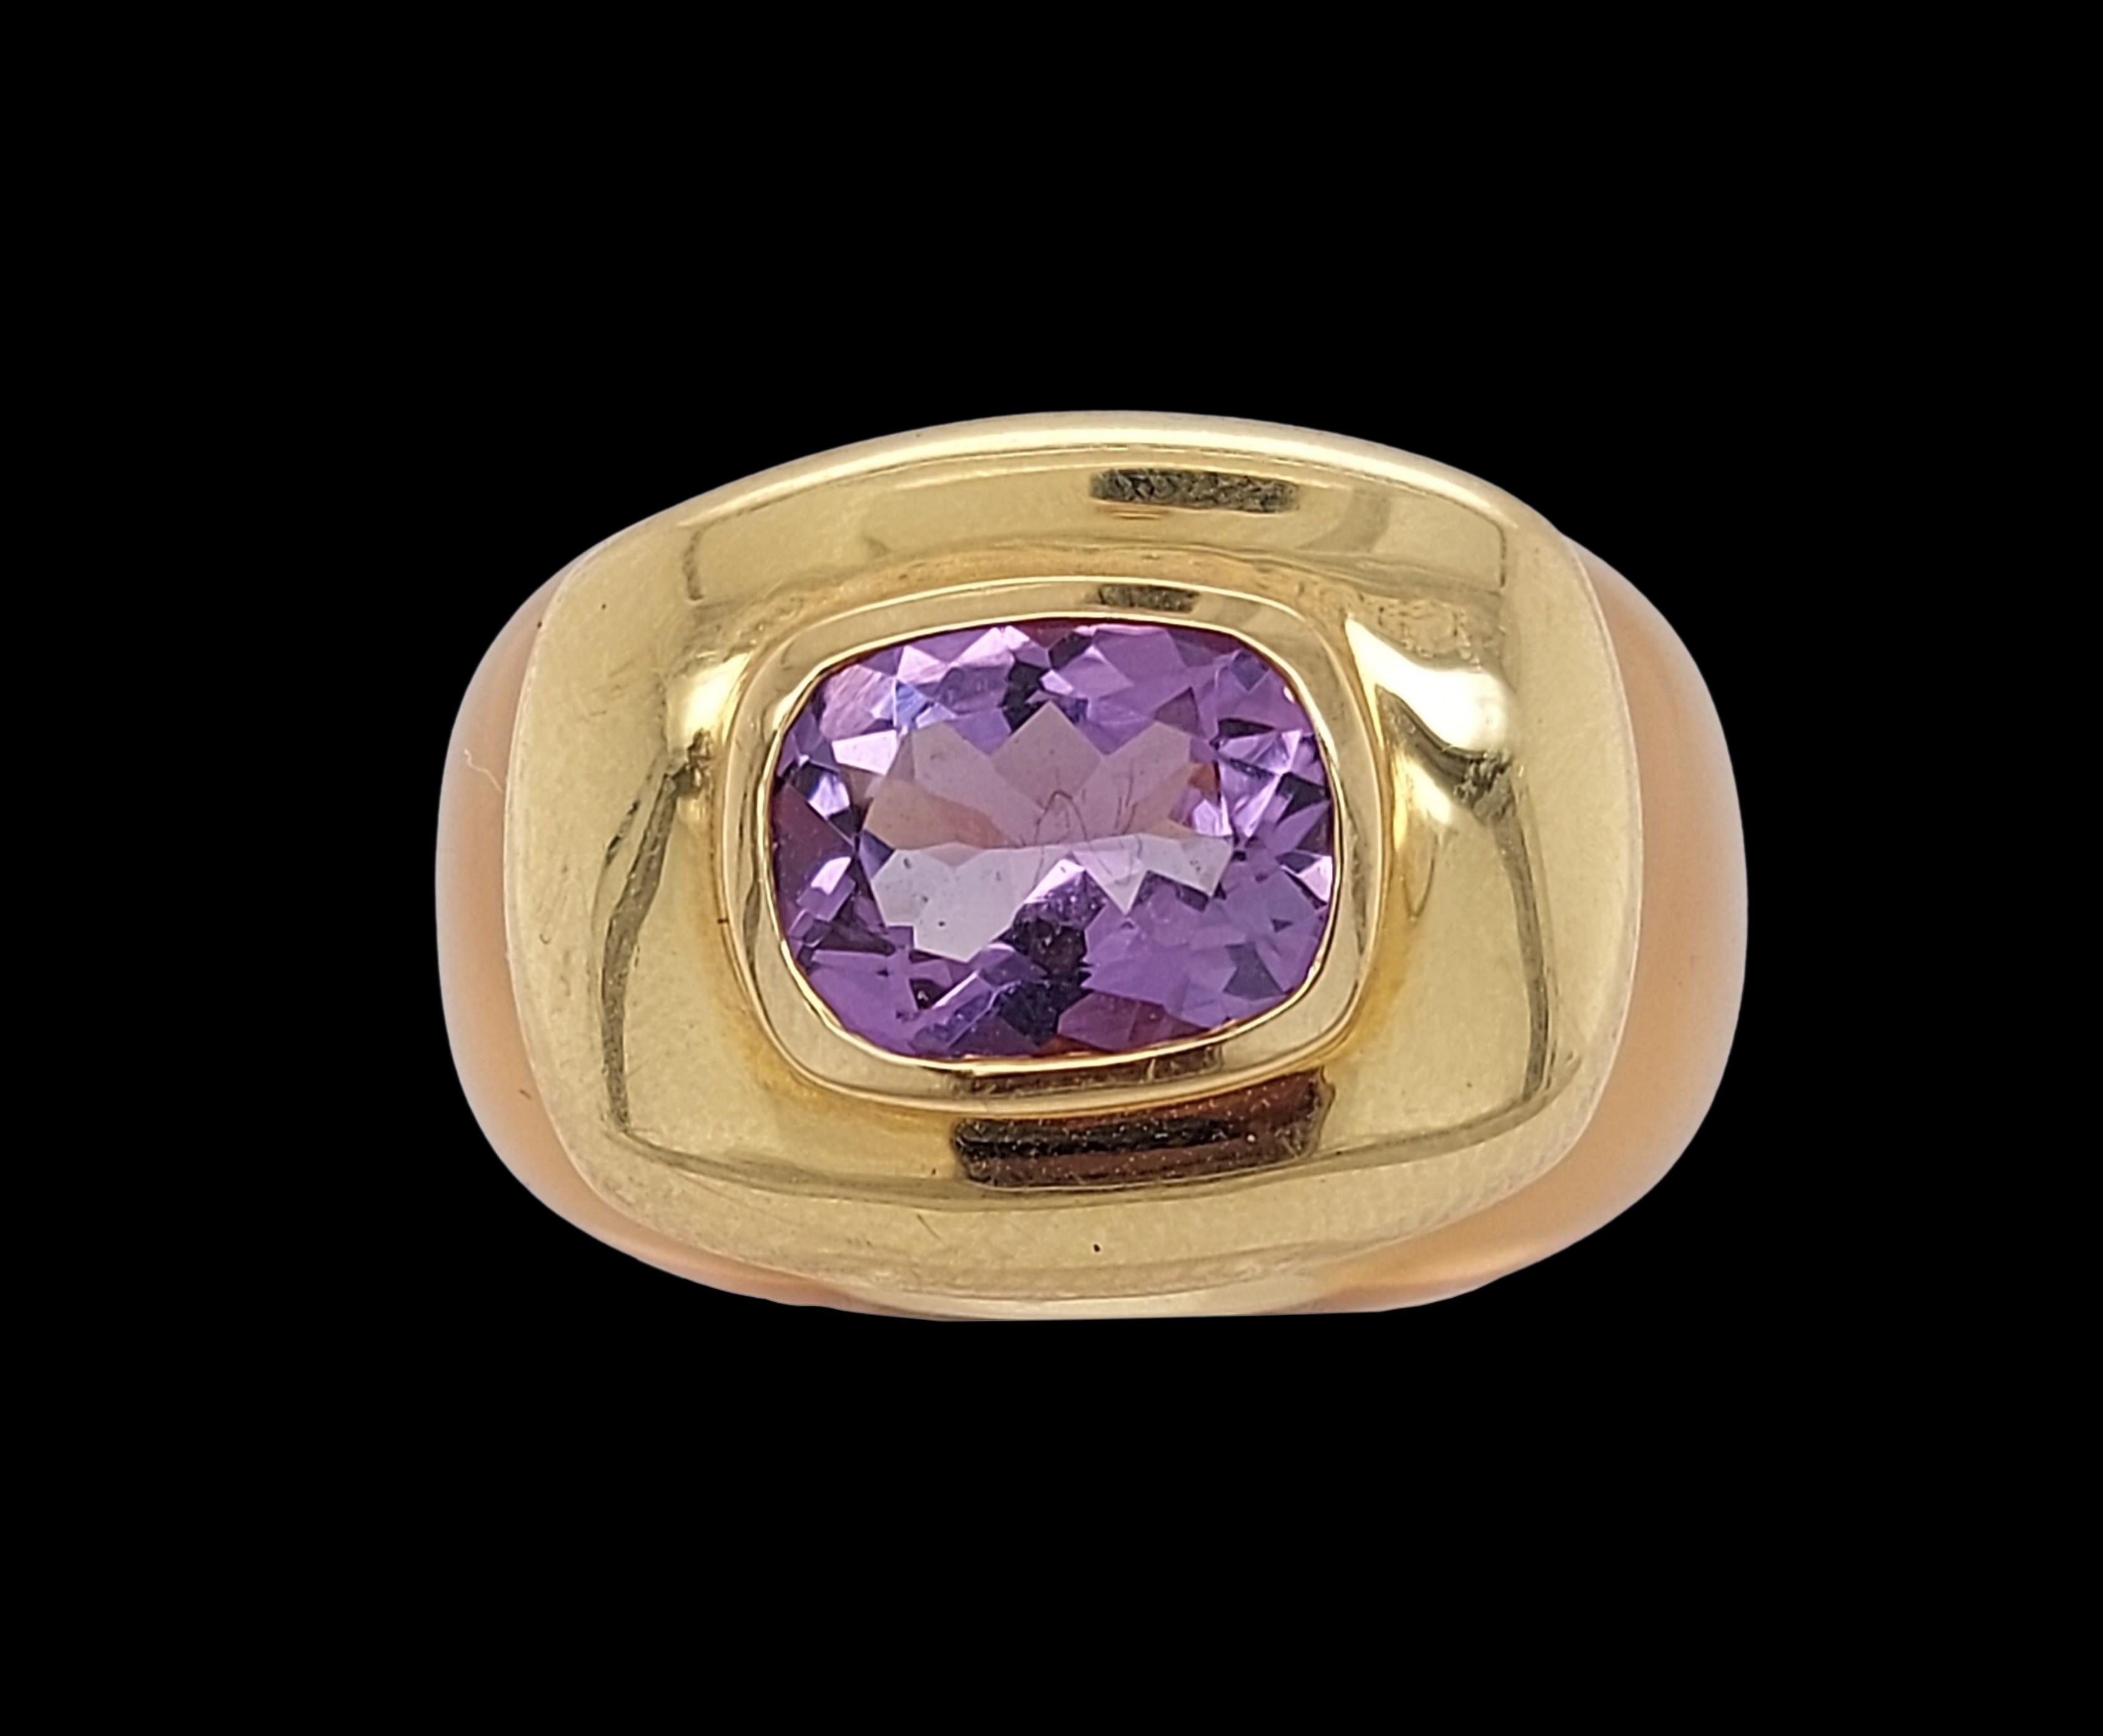 Very Unique and Gorgeous Ring with 18kt Yellow Gold & Purple Semi Precious Stone

Stone: Purple semi precious stone of approx. 3ct

Material: Band of the ring material is unknown but its very special, but the stone is set on 18kt yellow gold